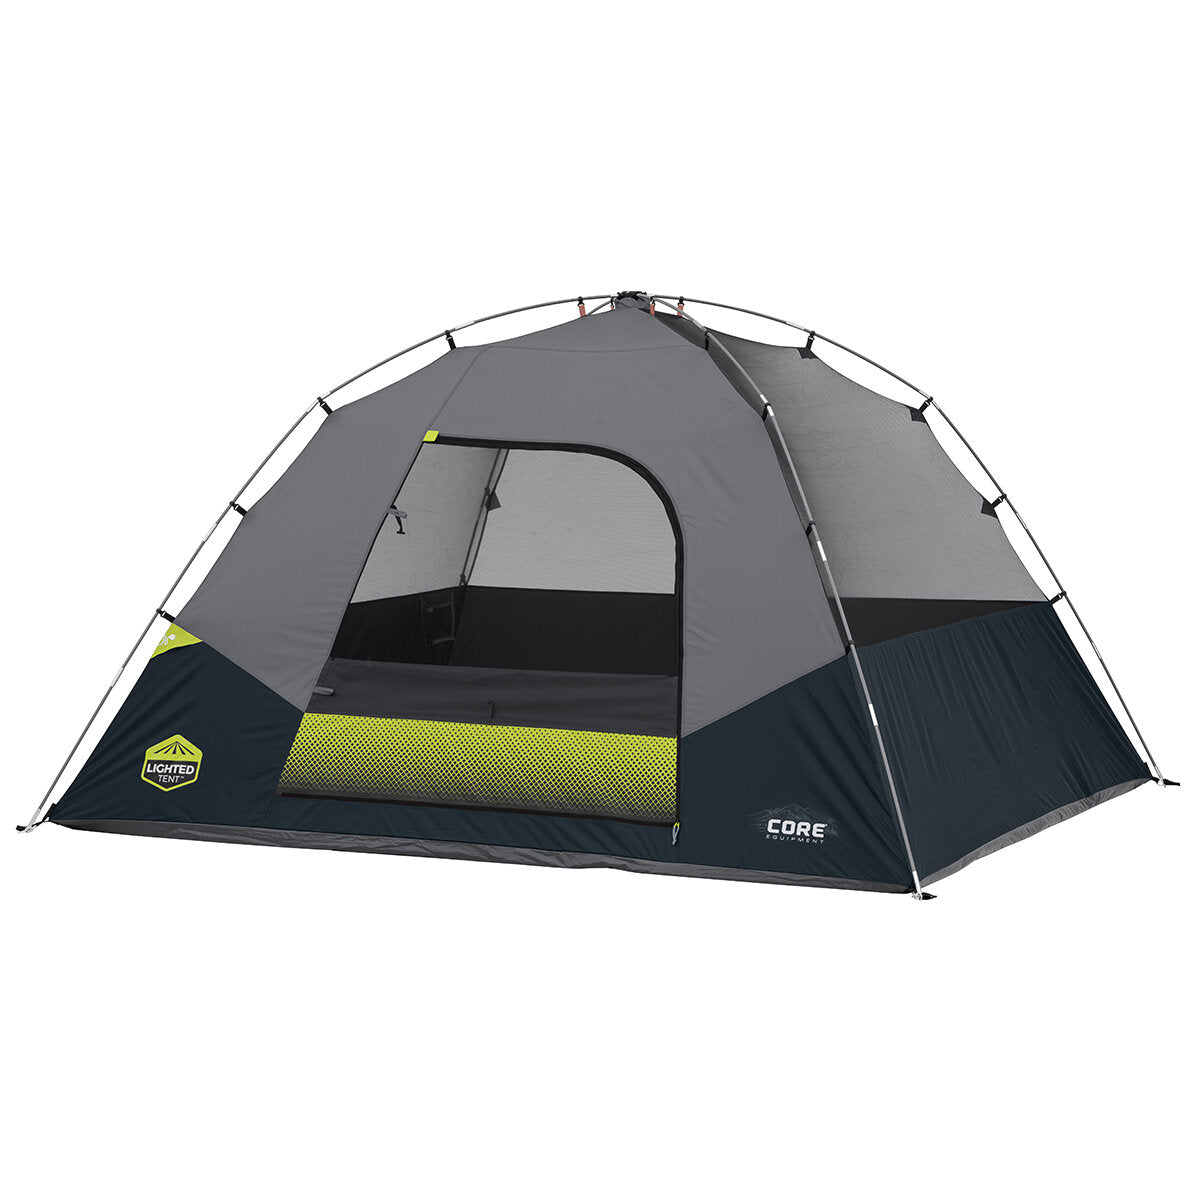 CORE 6 PERSON LIGHTED FULL RAINFLY DOME TENT